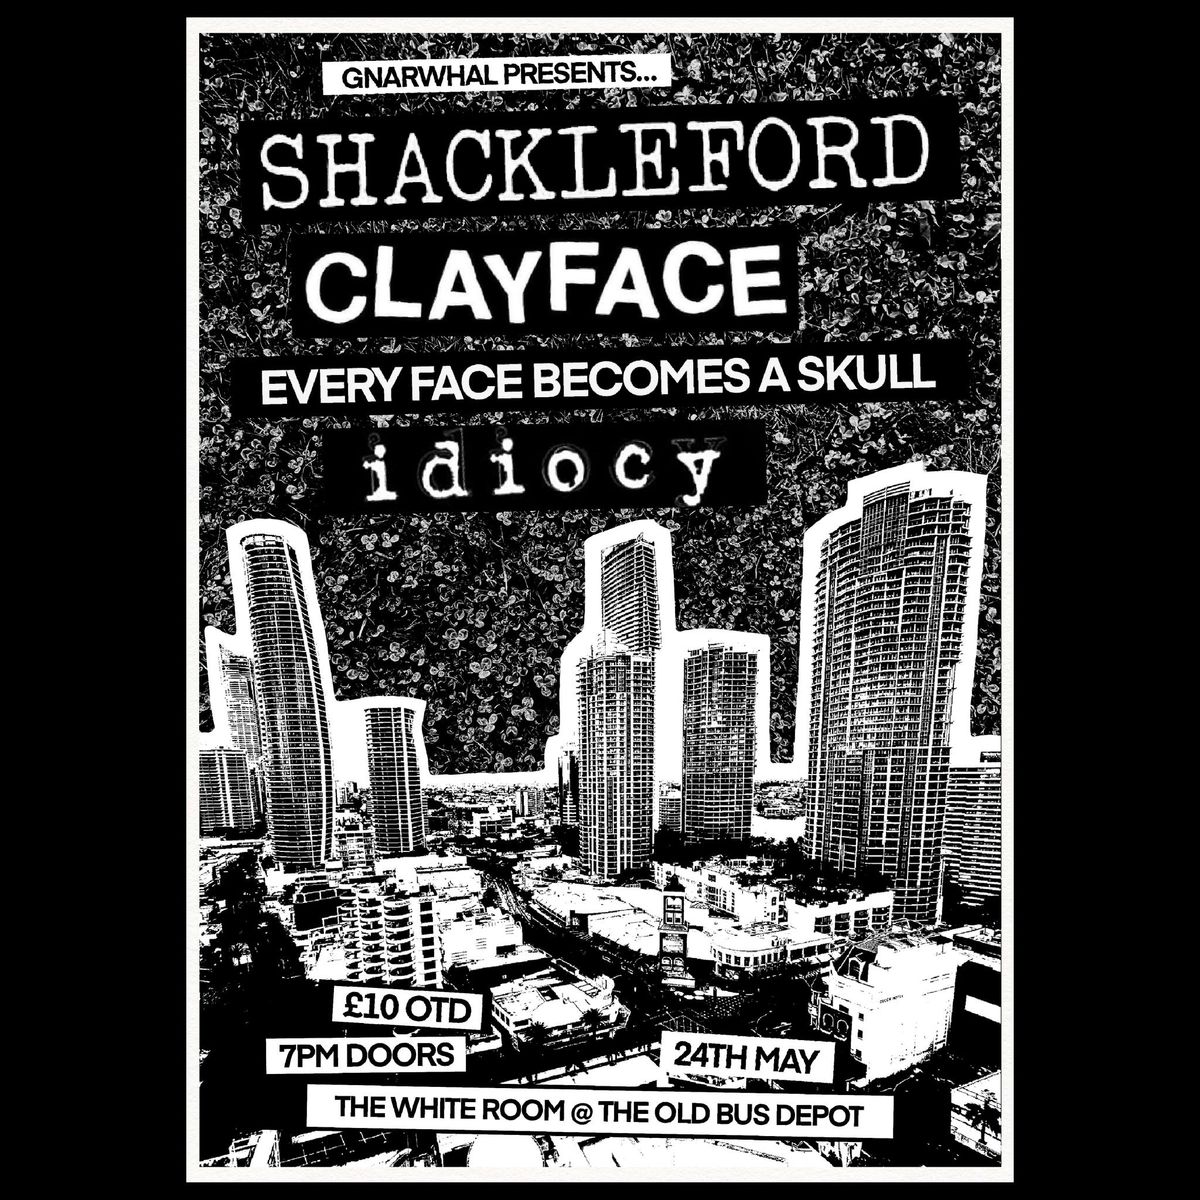 Shackleford \/ Clayface \/ Every Face Becomes A Skull \/ Idiocy @ The Old Bus Depot